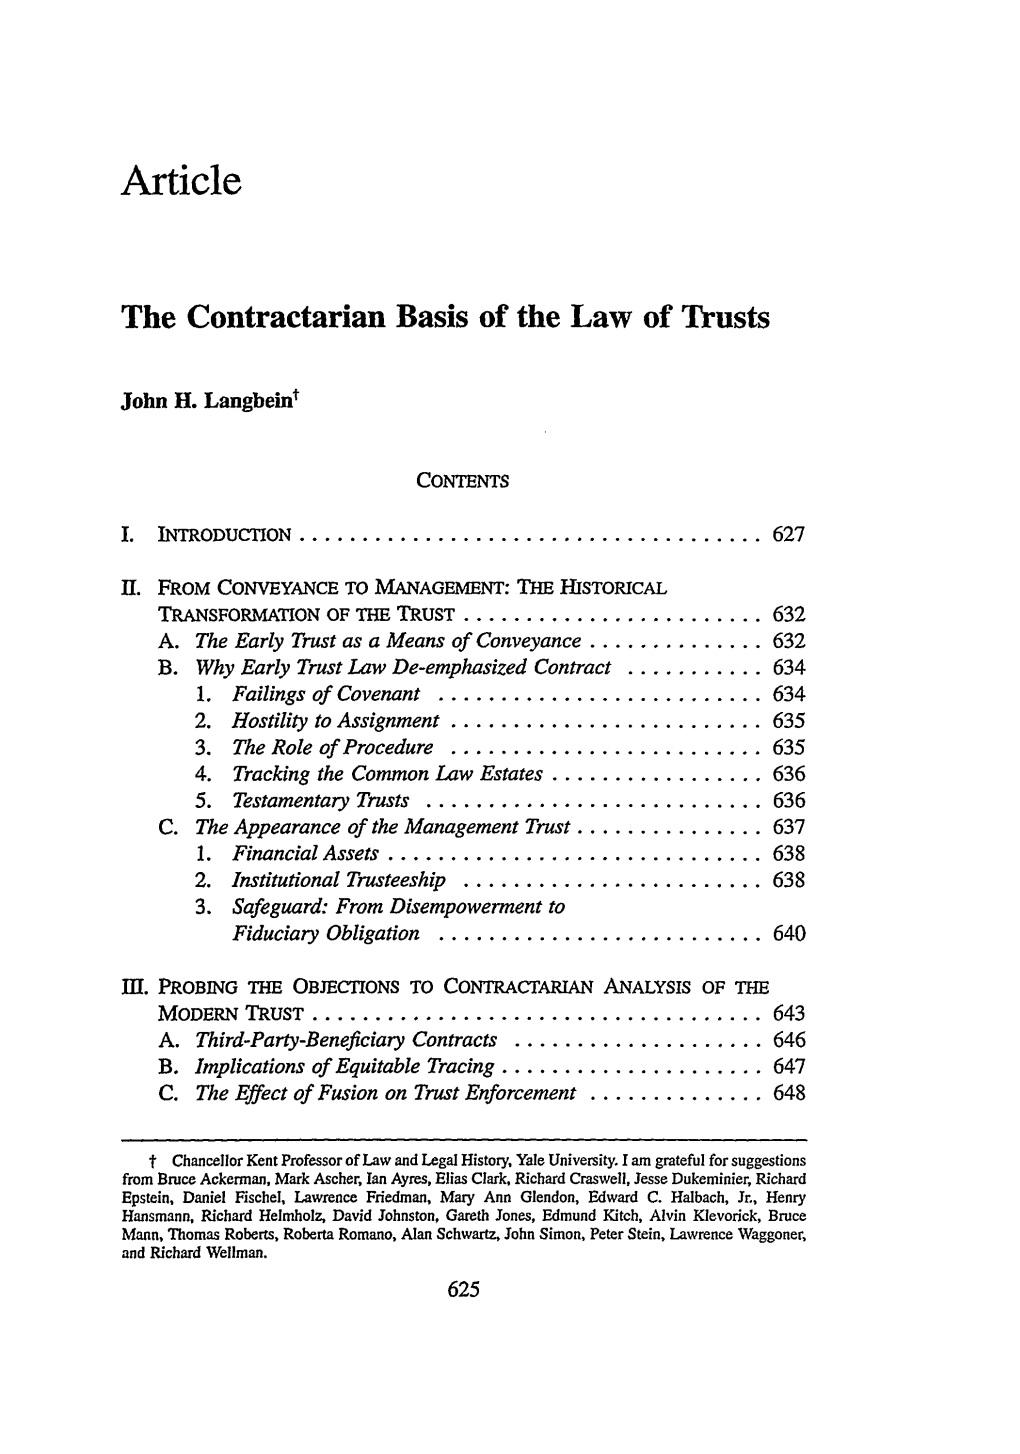 The Contractarian Basis of the Law of Trusts